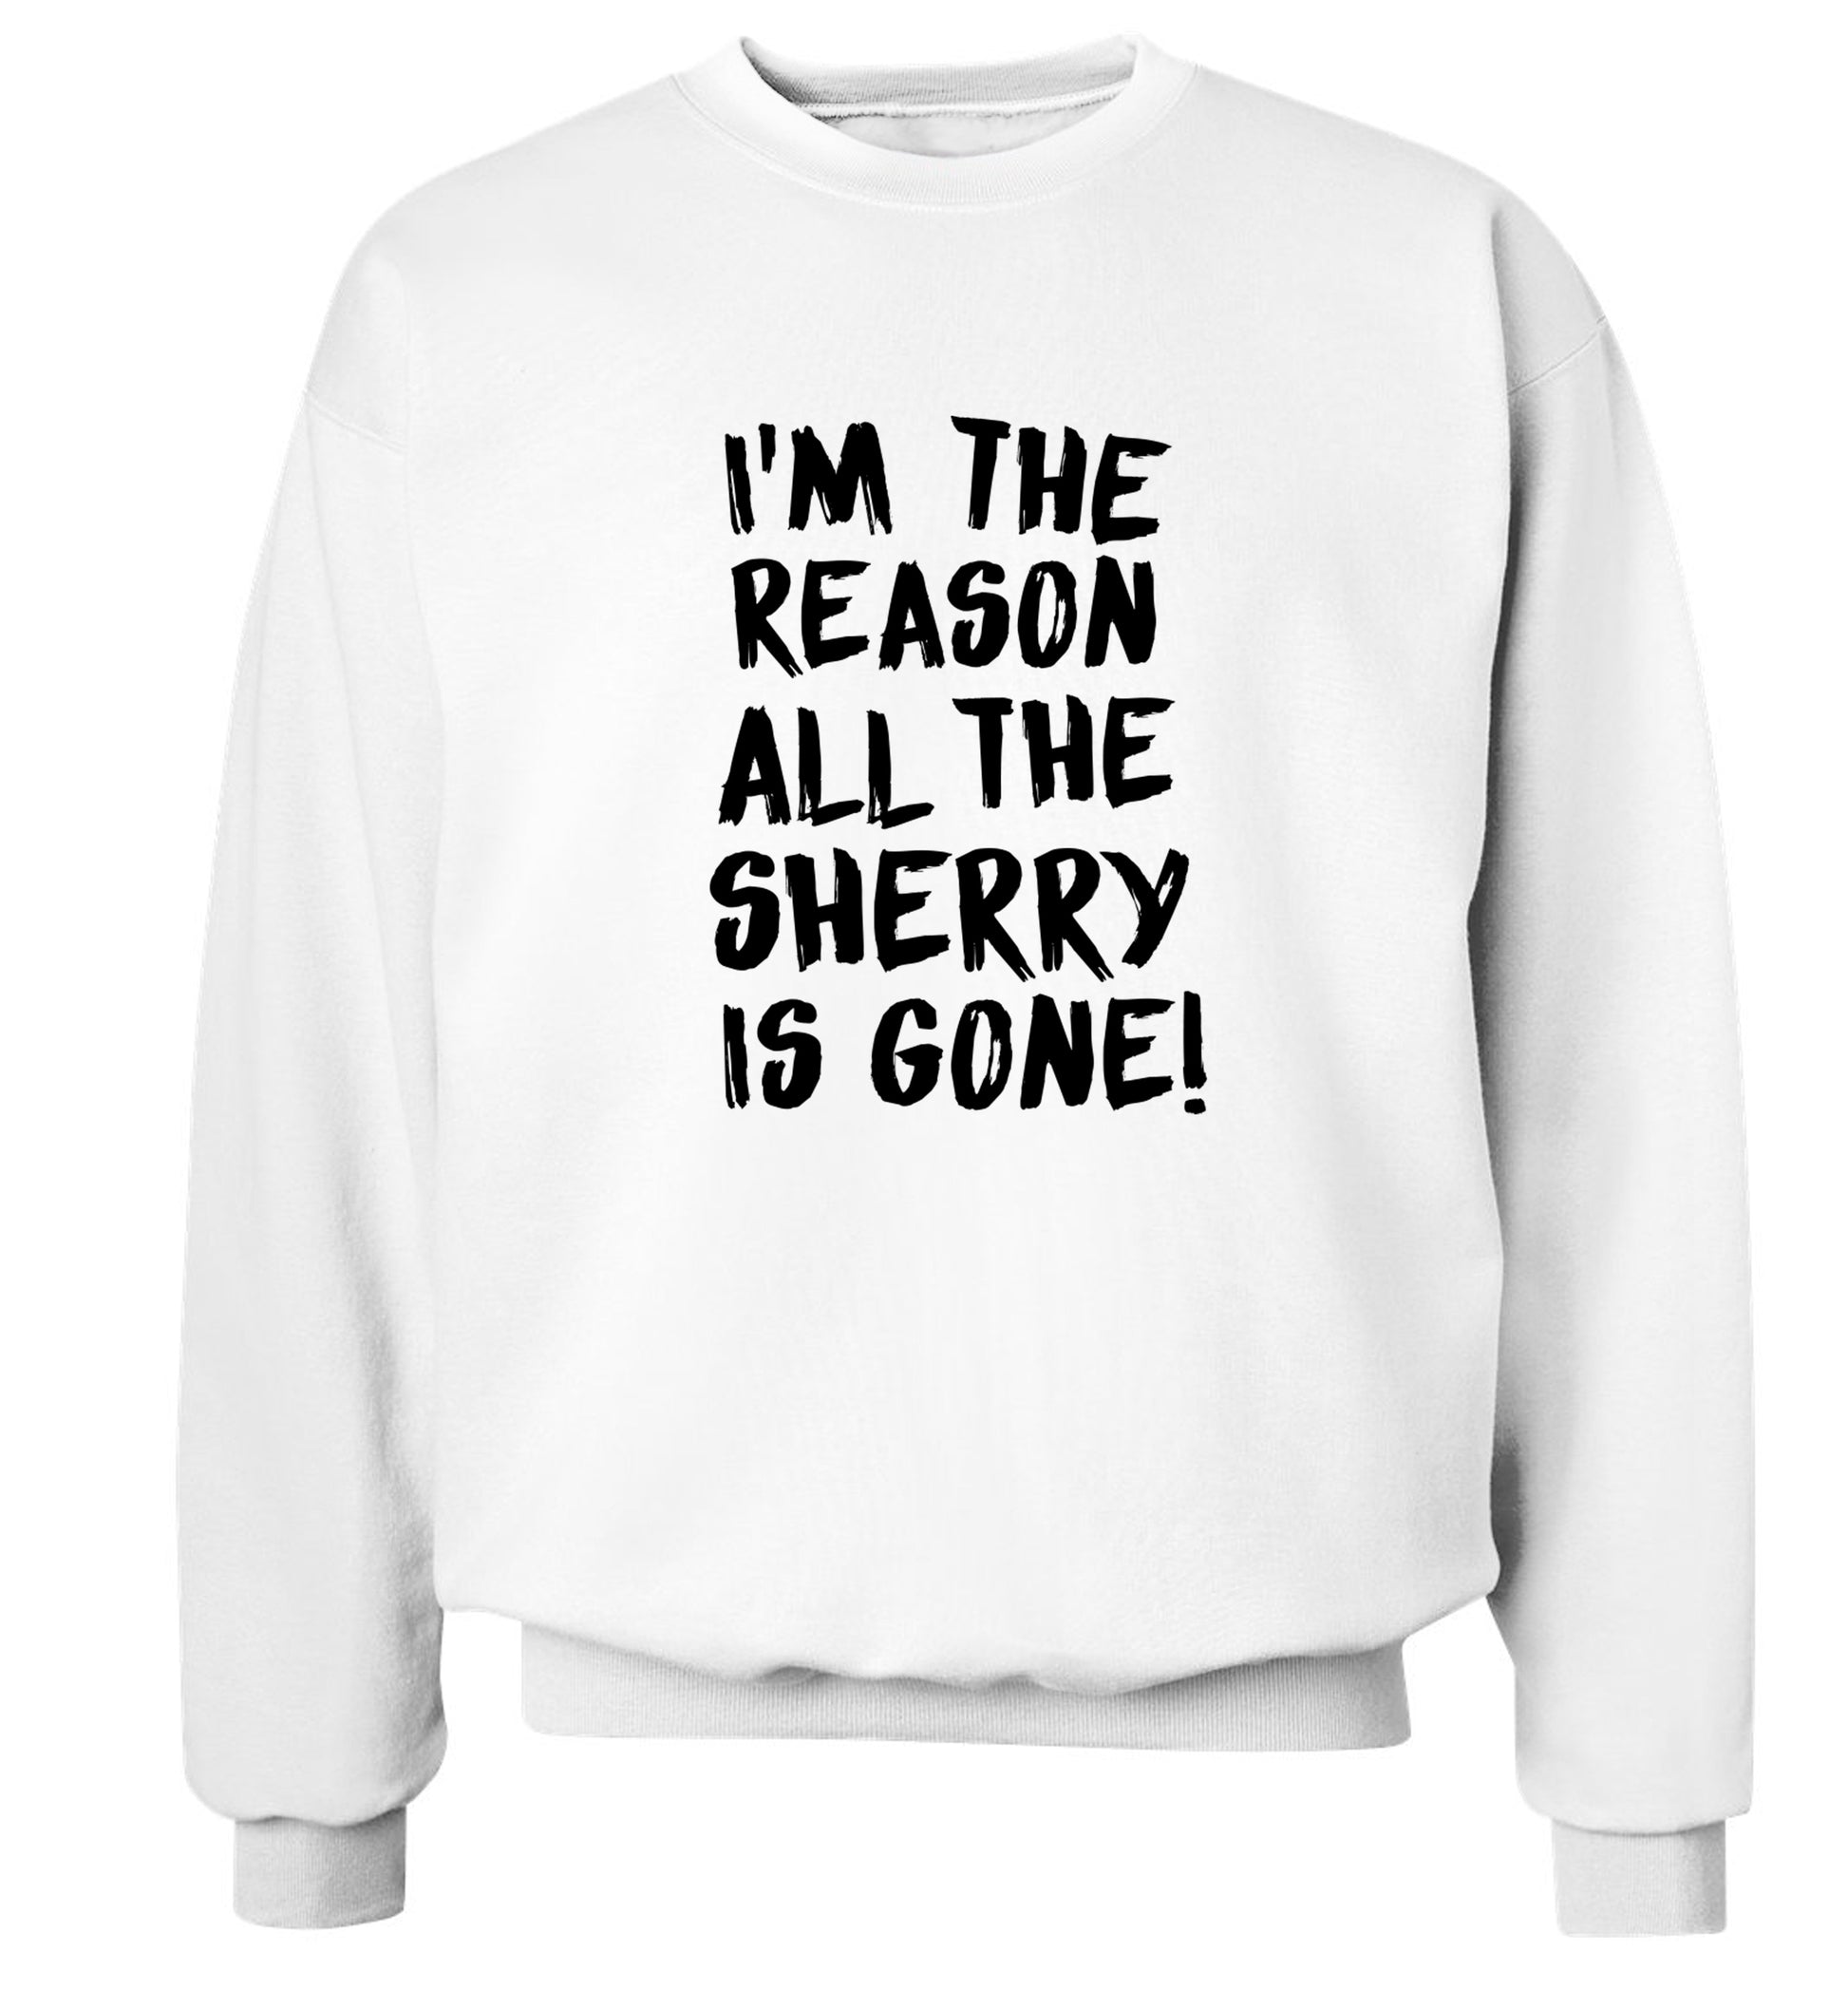 I'm the reason all the sherry is gone Adult's unisex white Sweater 2XL